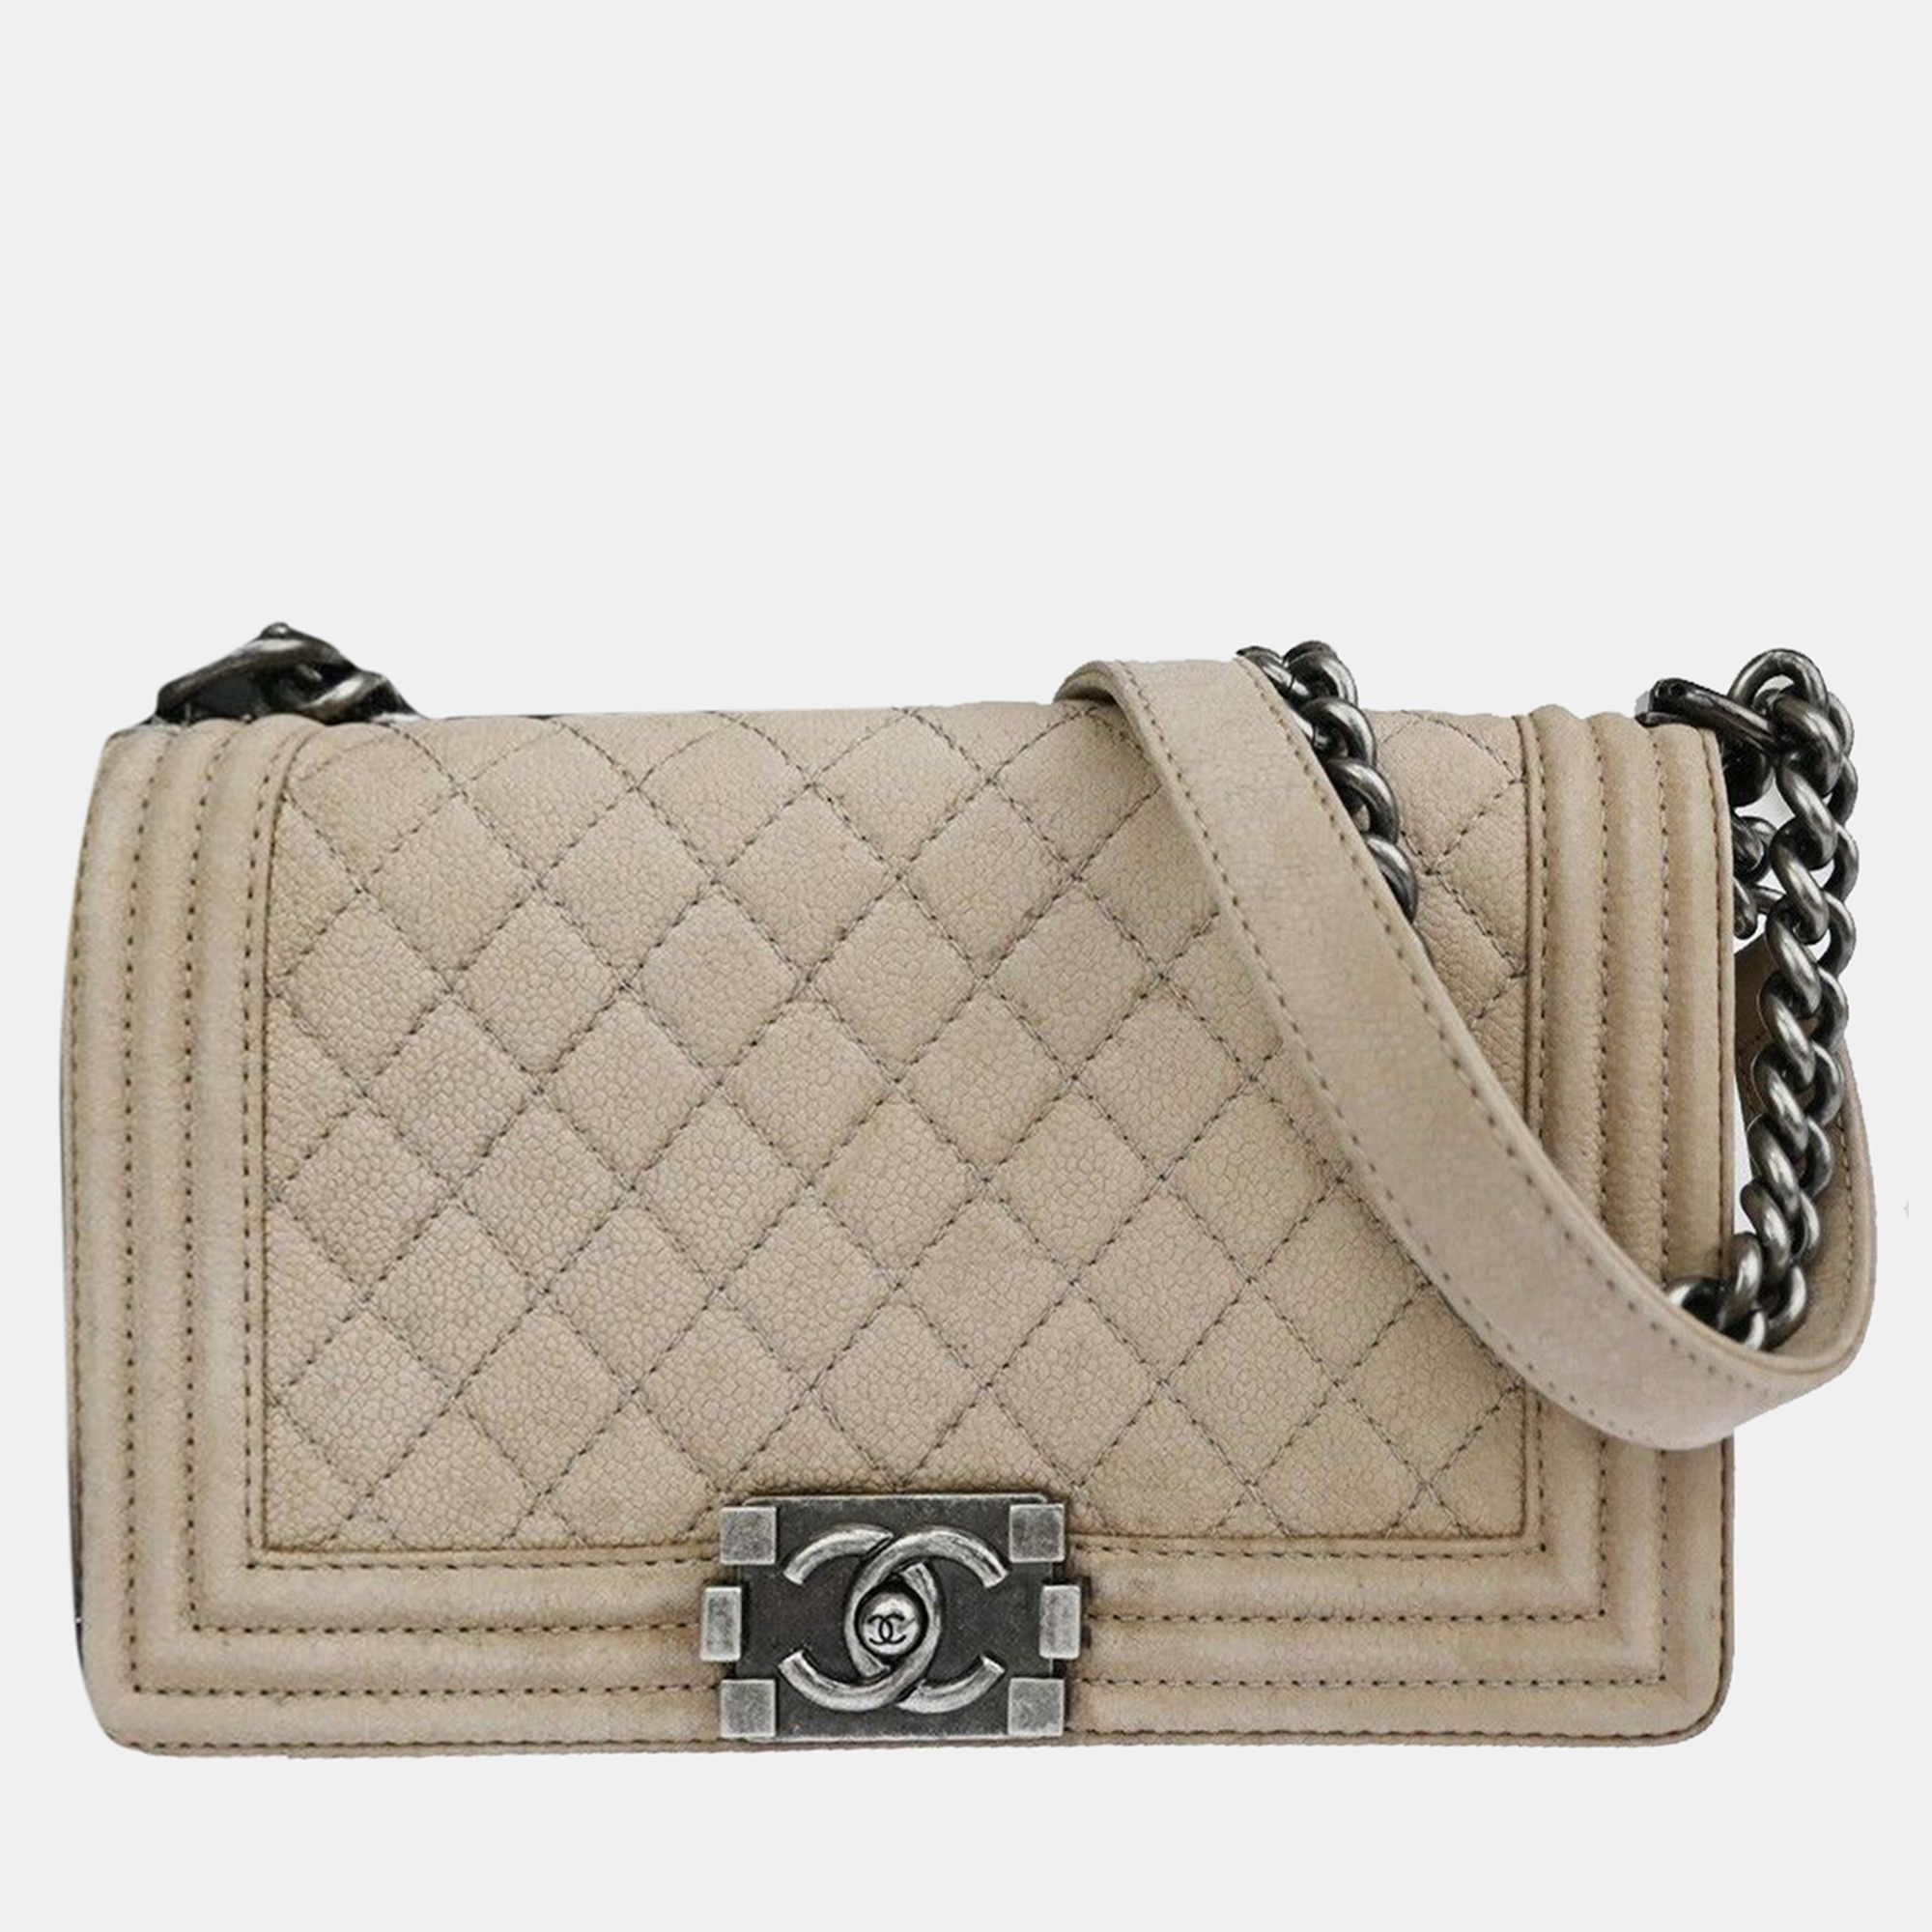 Carry this lovely Chanel shoulder bag as a stylish accompaniment to your ensemble. Made from high quality materials it has a luxe look and durable quality.